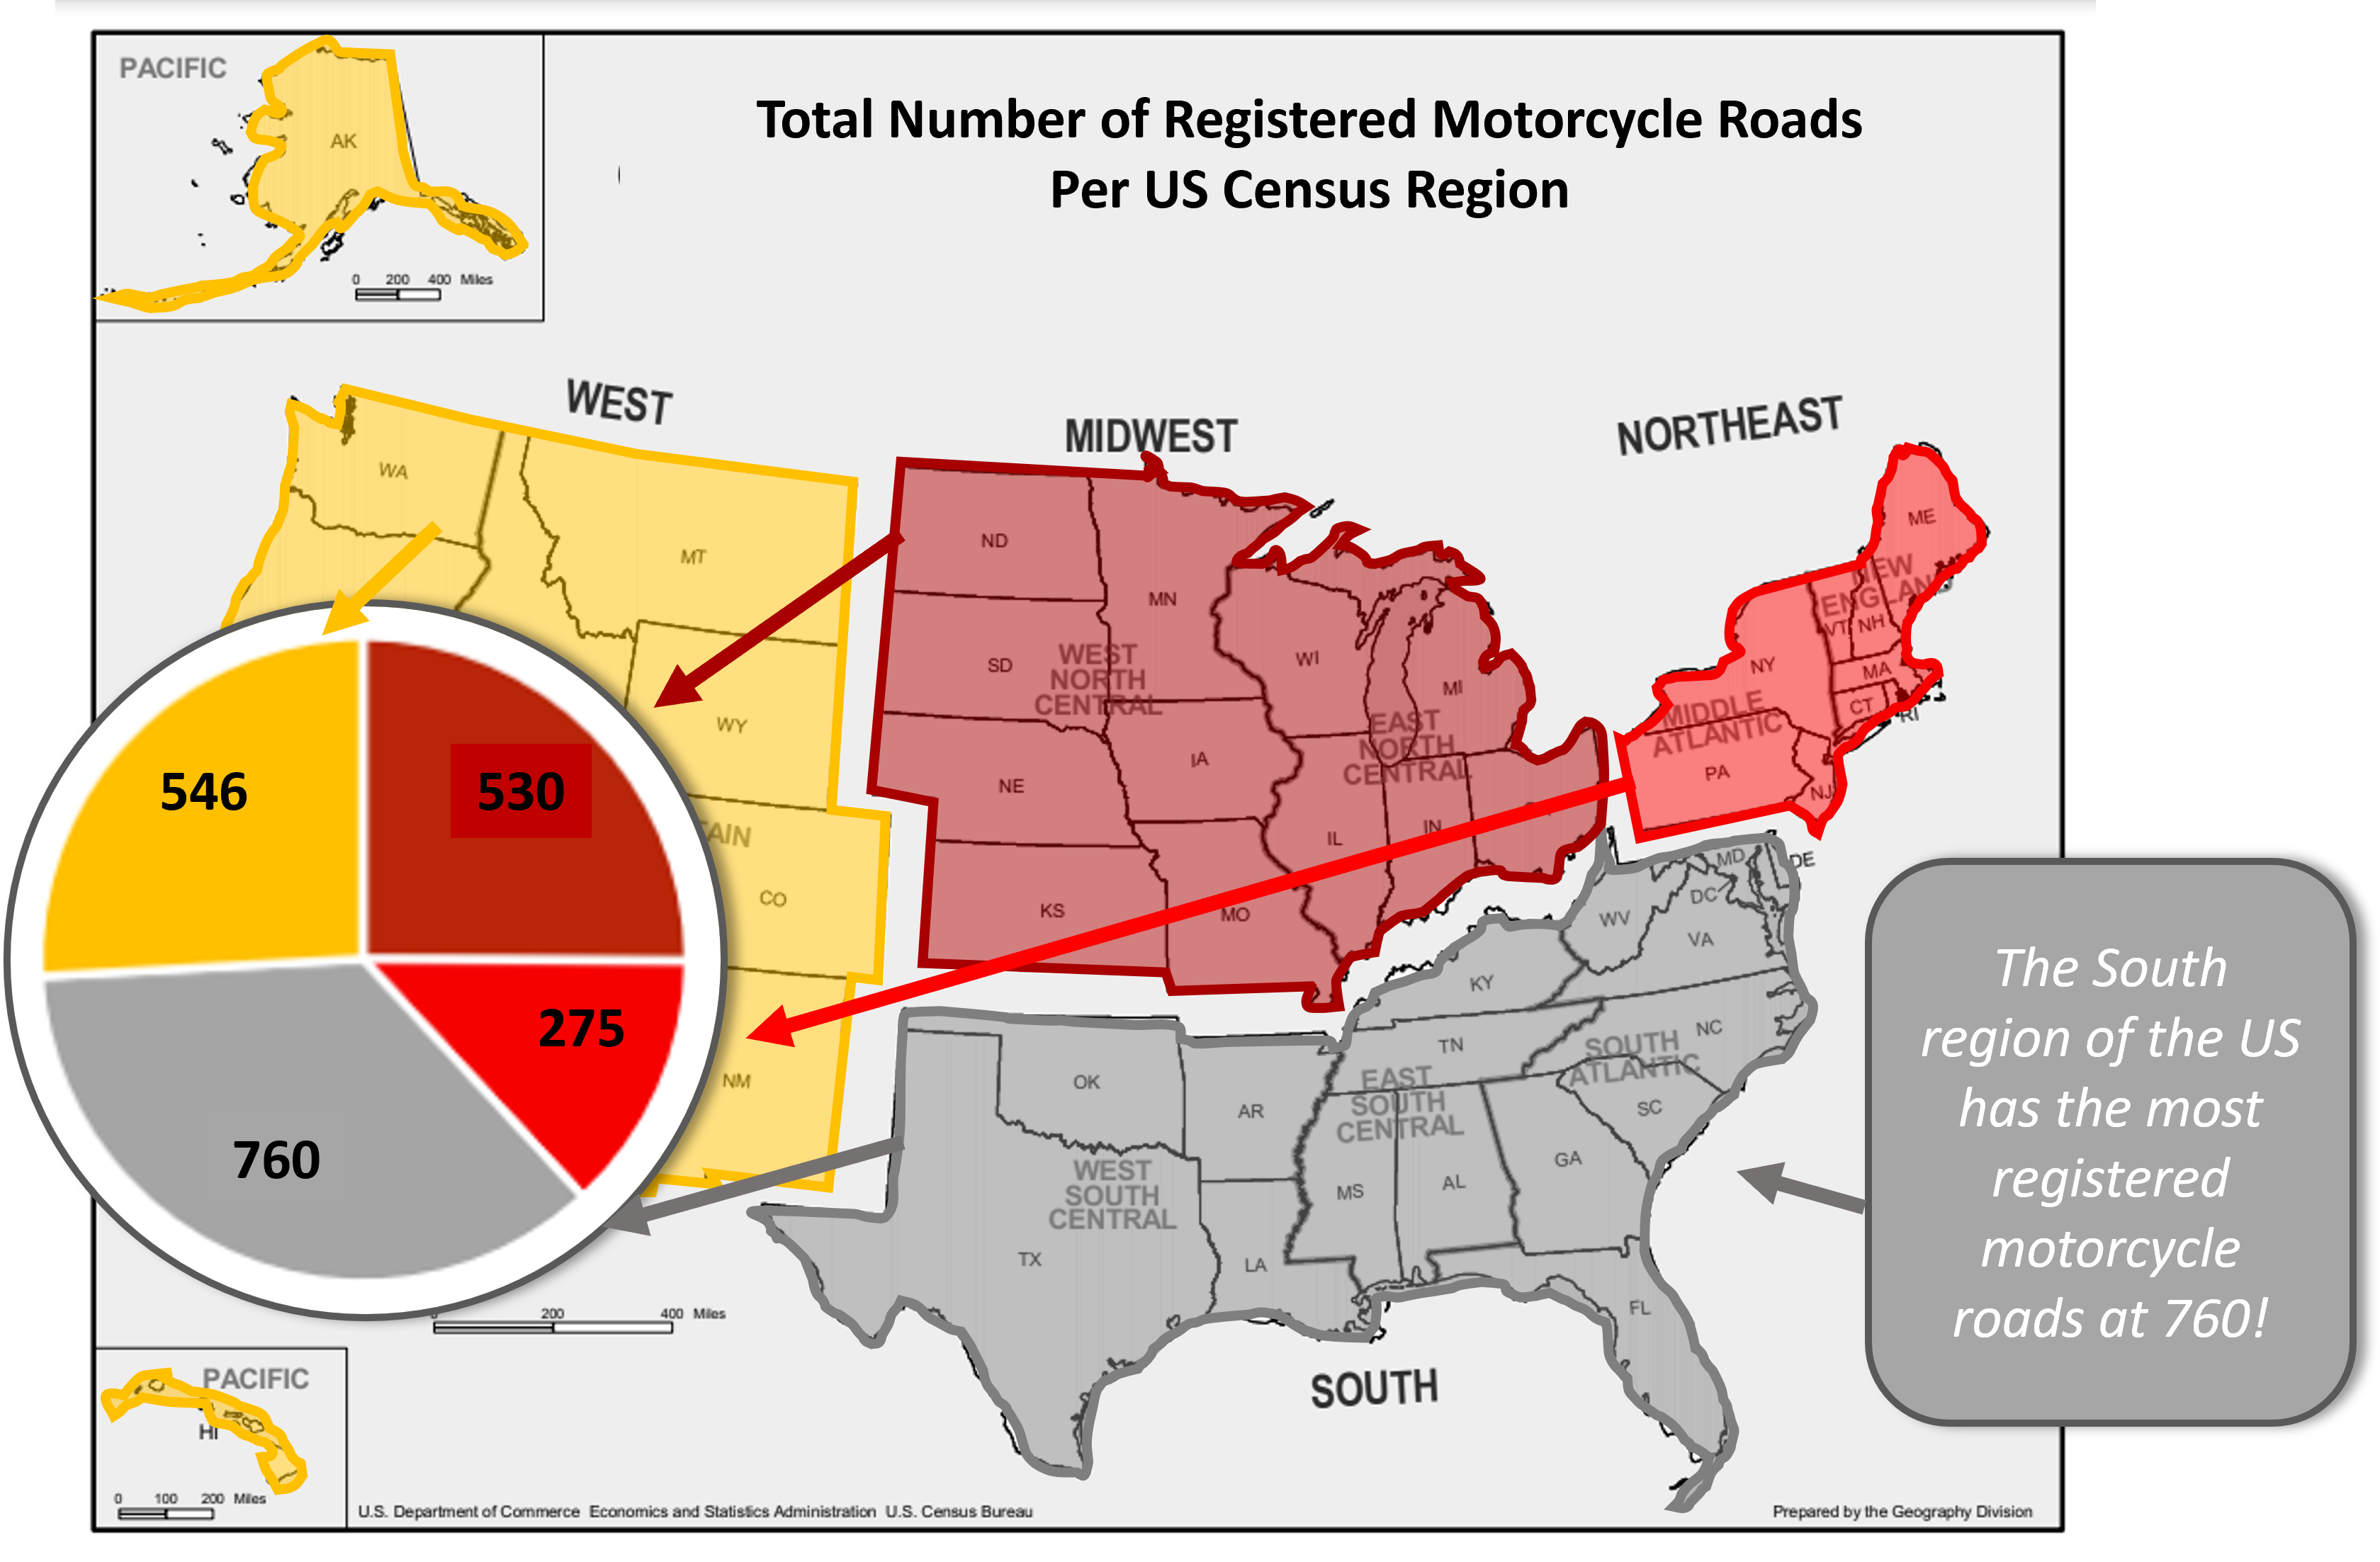 registered motorcycle roads per region - the south has the most